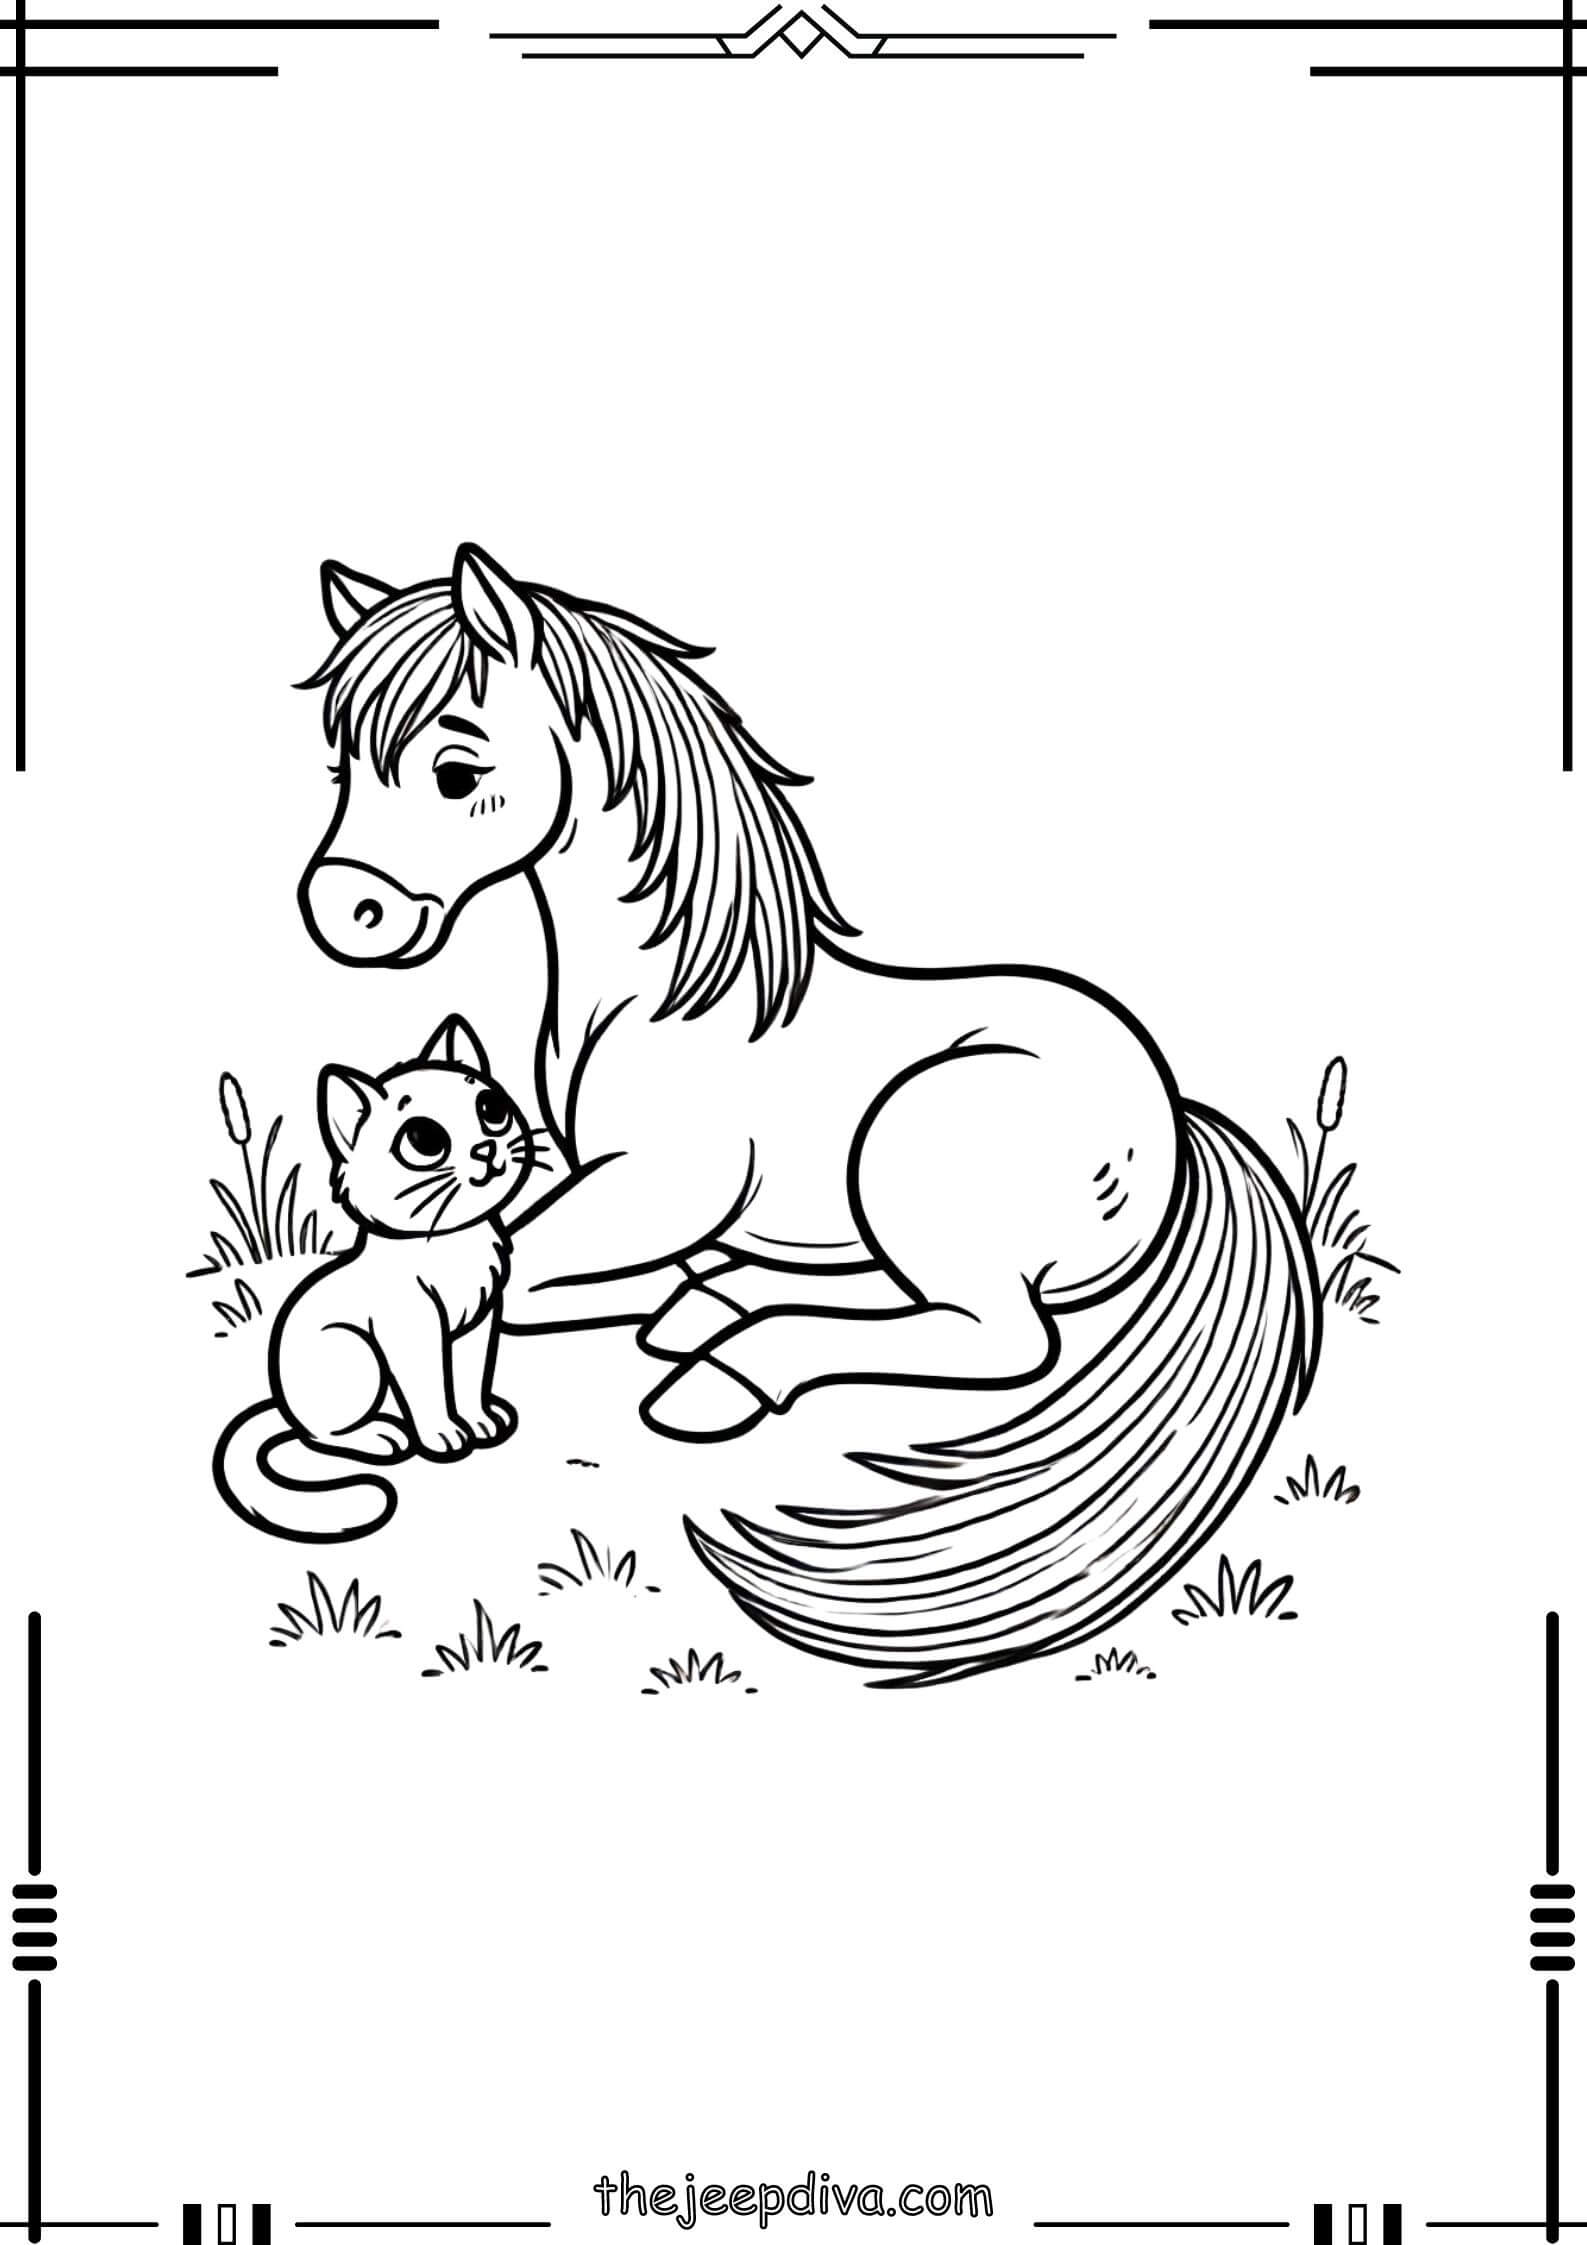 Horse-Colouring-Pages-Hard-12